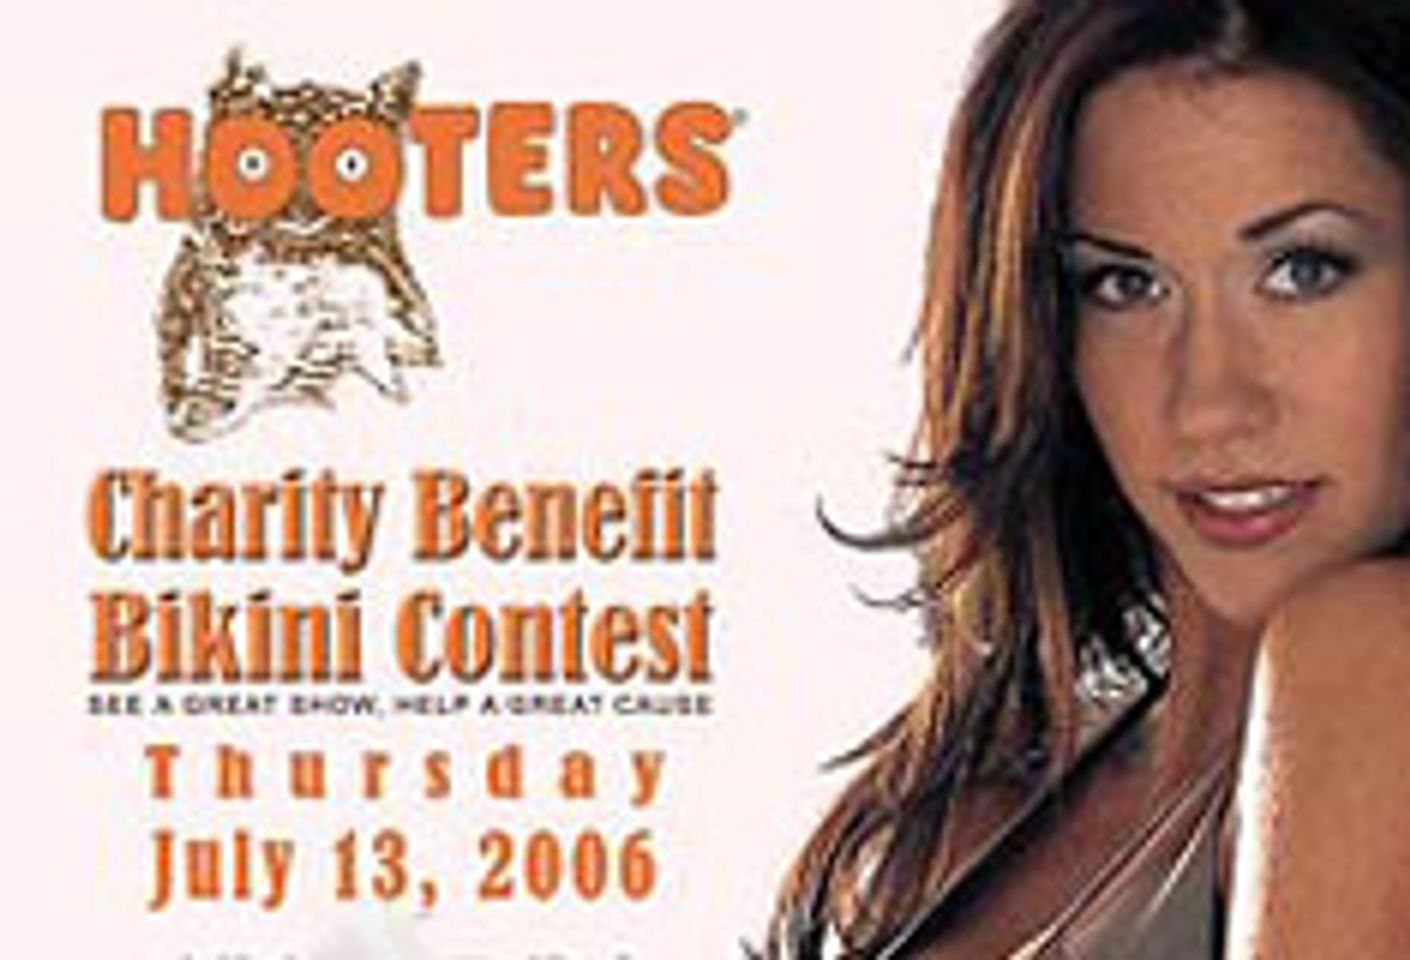 Hooters Fundraiser Gets Flak from City